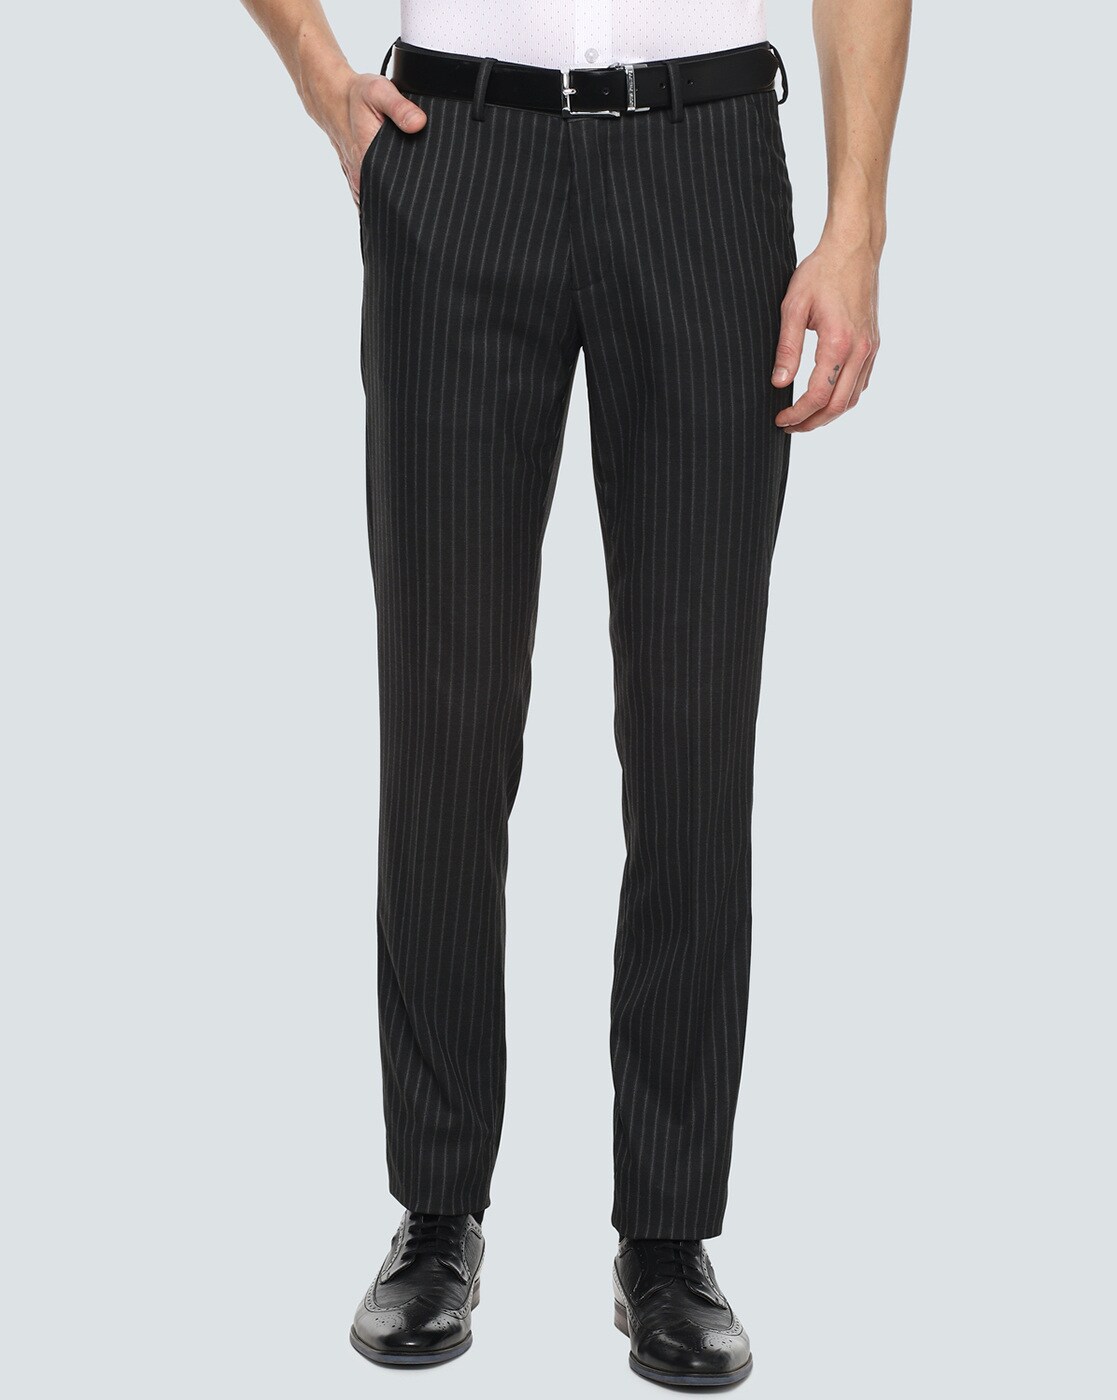 Buy LOUIS PHILIPPE Black Checks Polyester Viscose Slim Fit Mens Trousers   Shoppers Stop